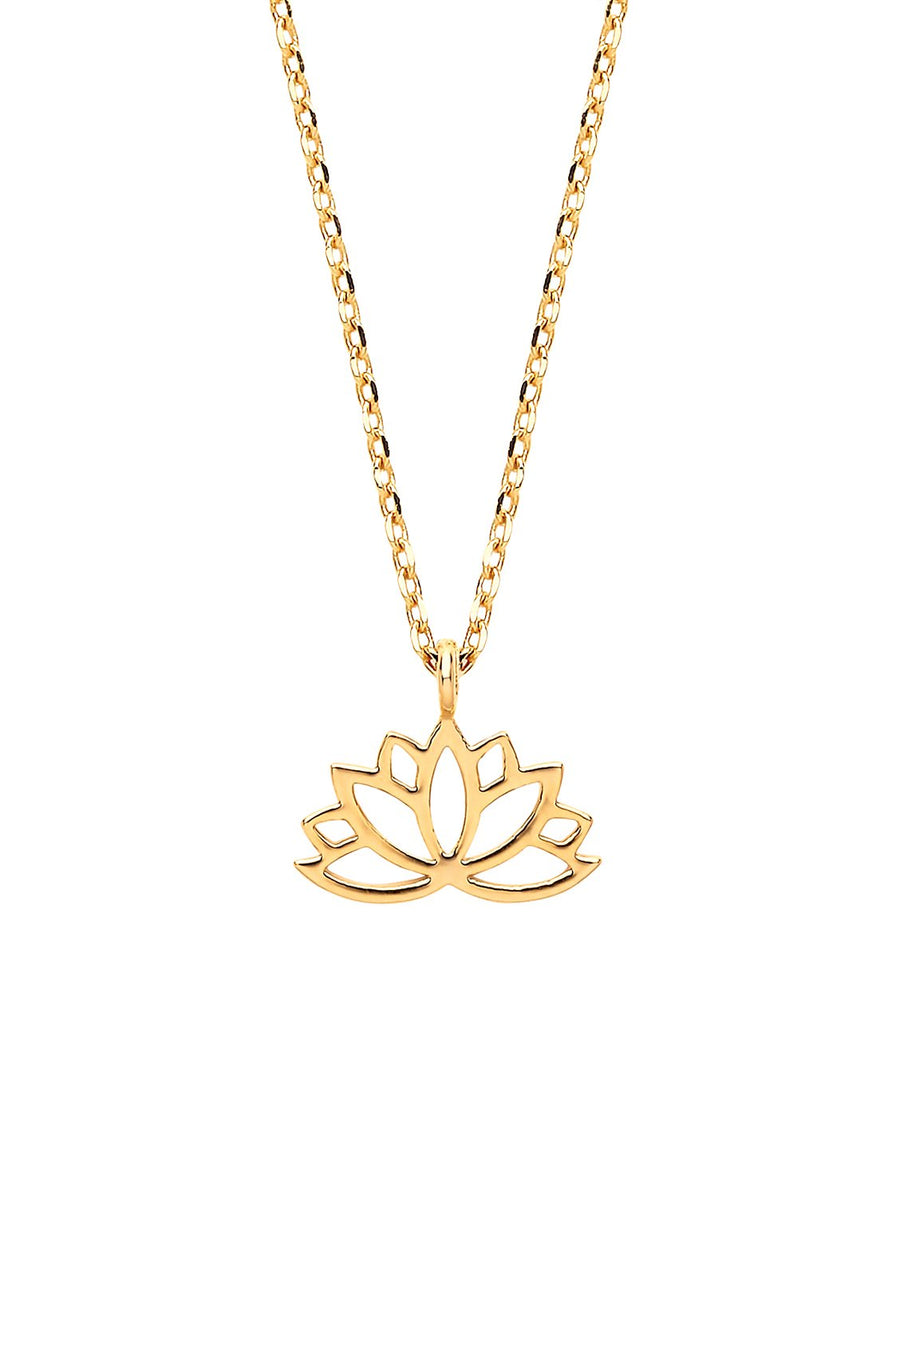 Lotus Flower Cut Out Necklace - Gold Plated